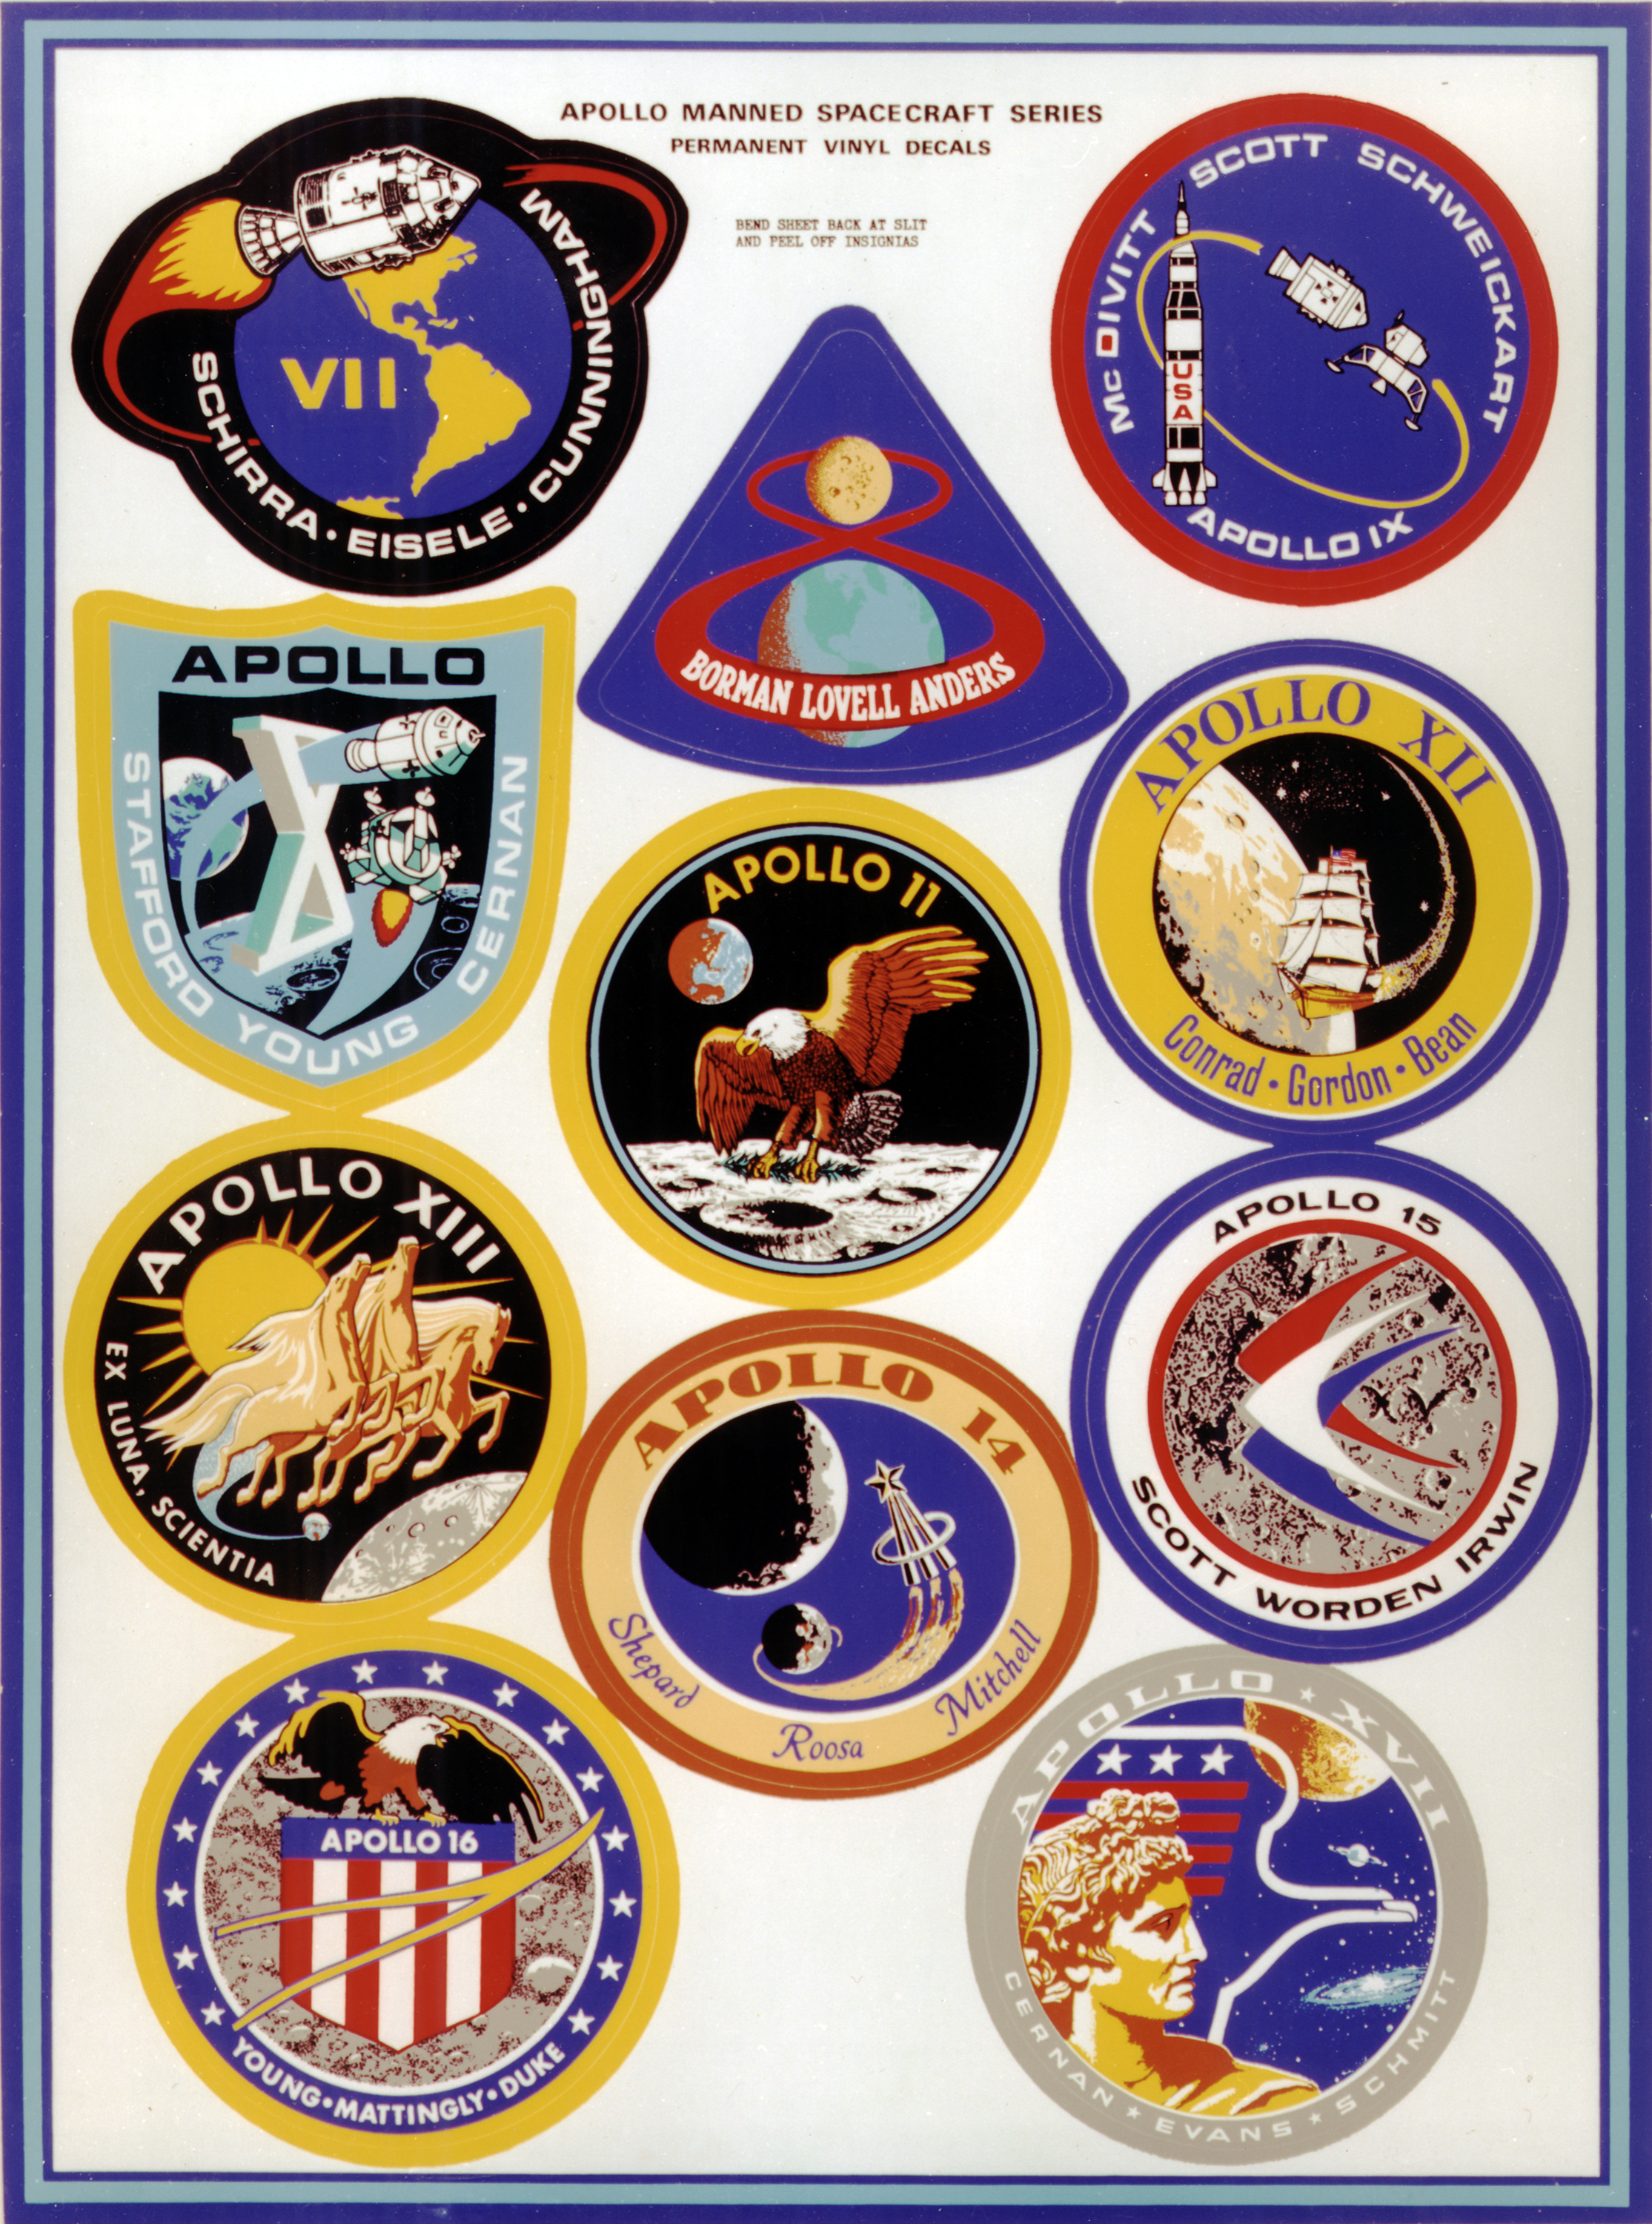 Apollo Mission Patch Display